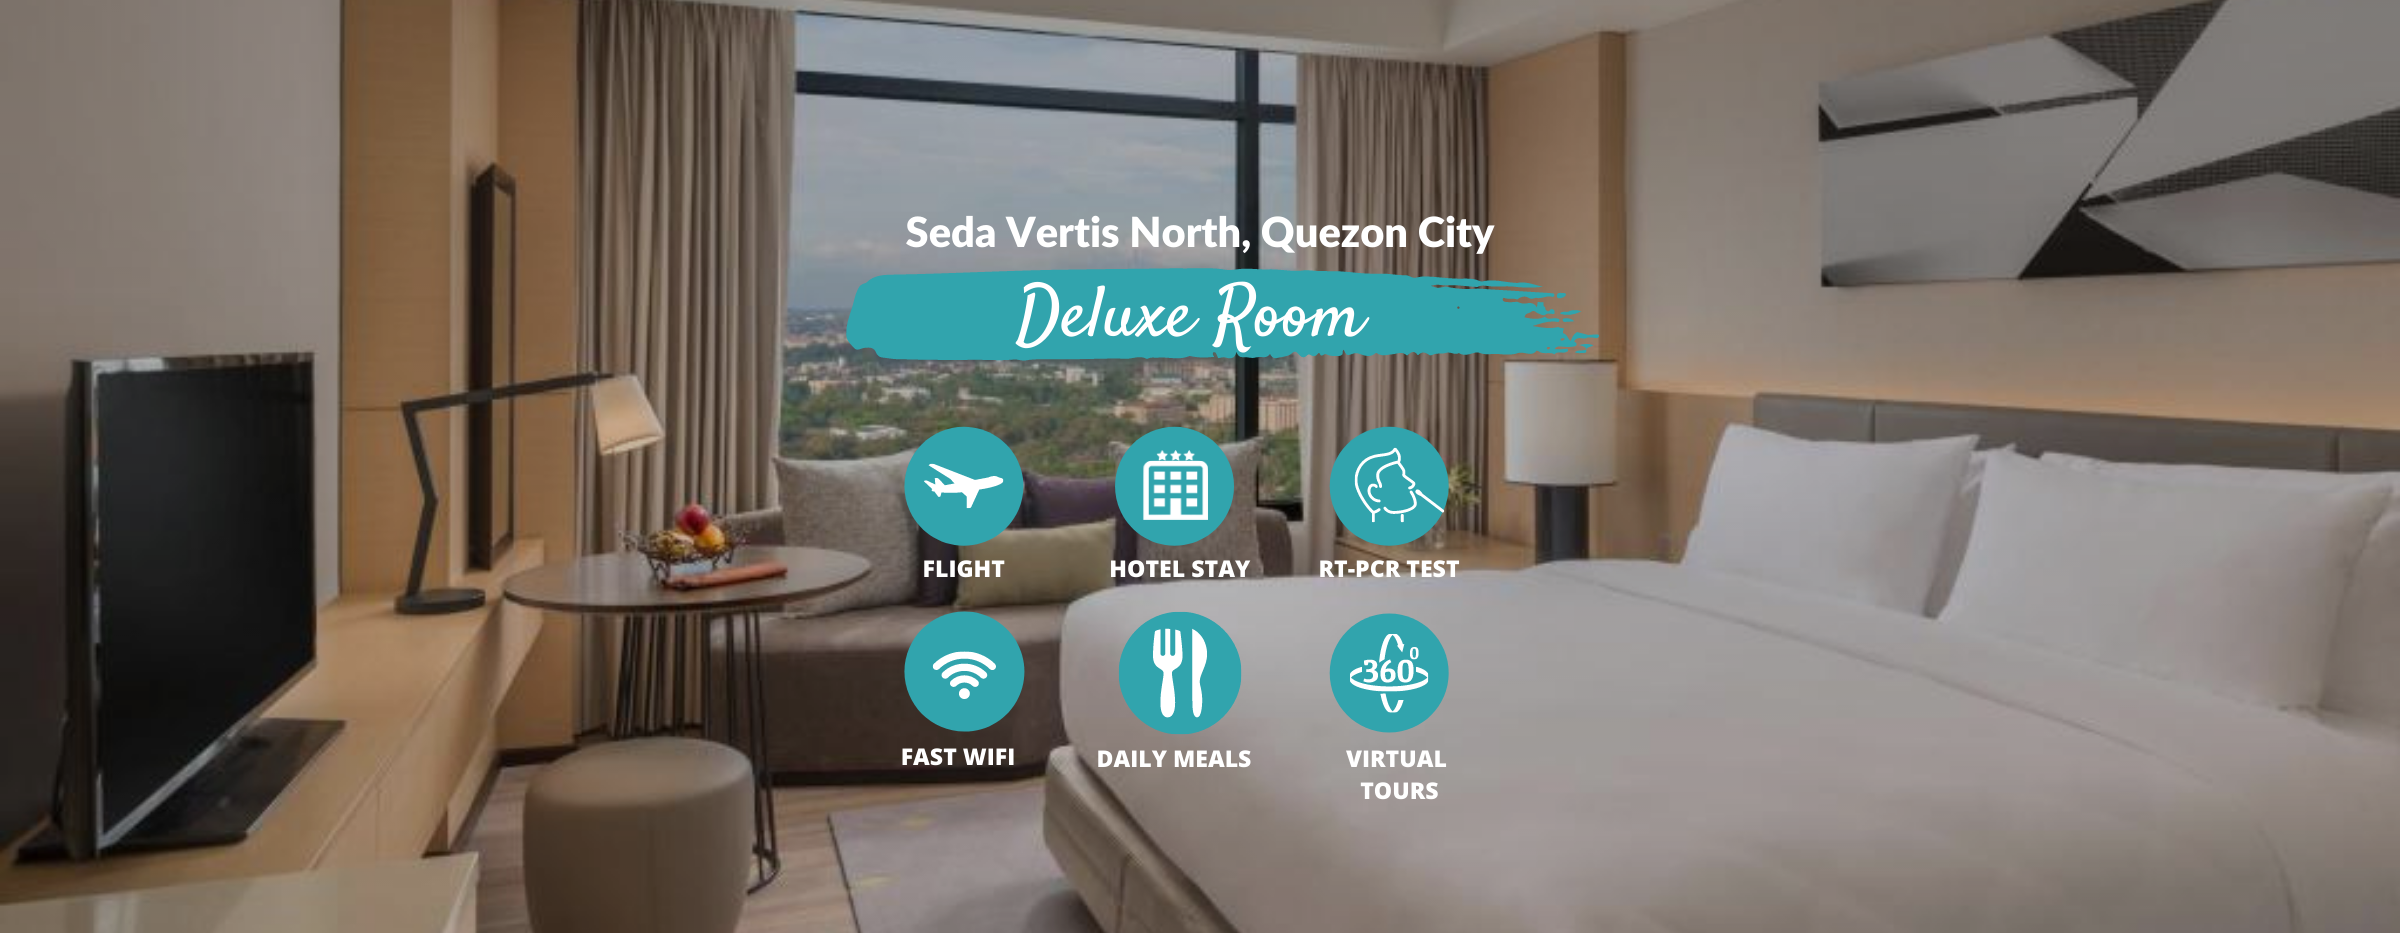 Manila Quarantine from LAX at Seda Vertis North with Philippine Airlines, Meals & Virtual Tours